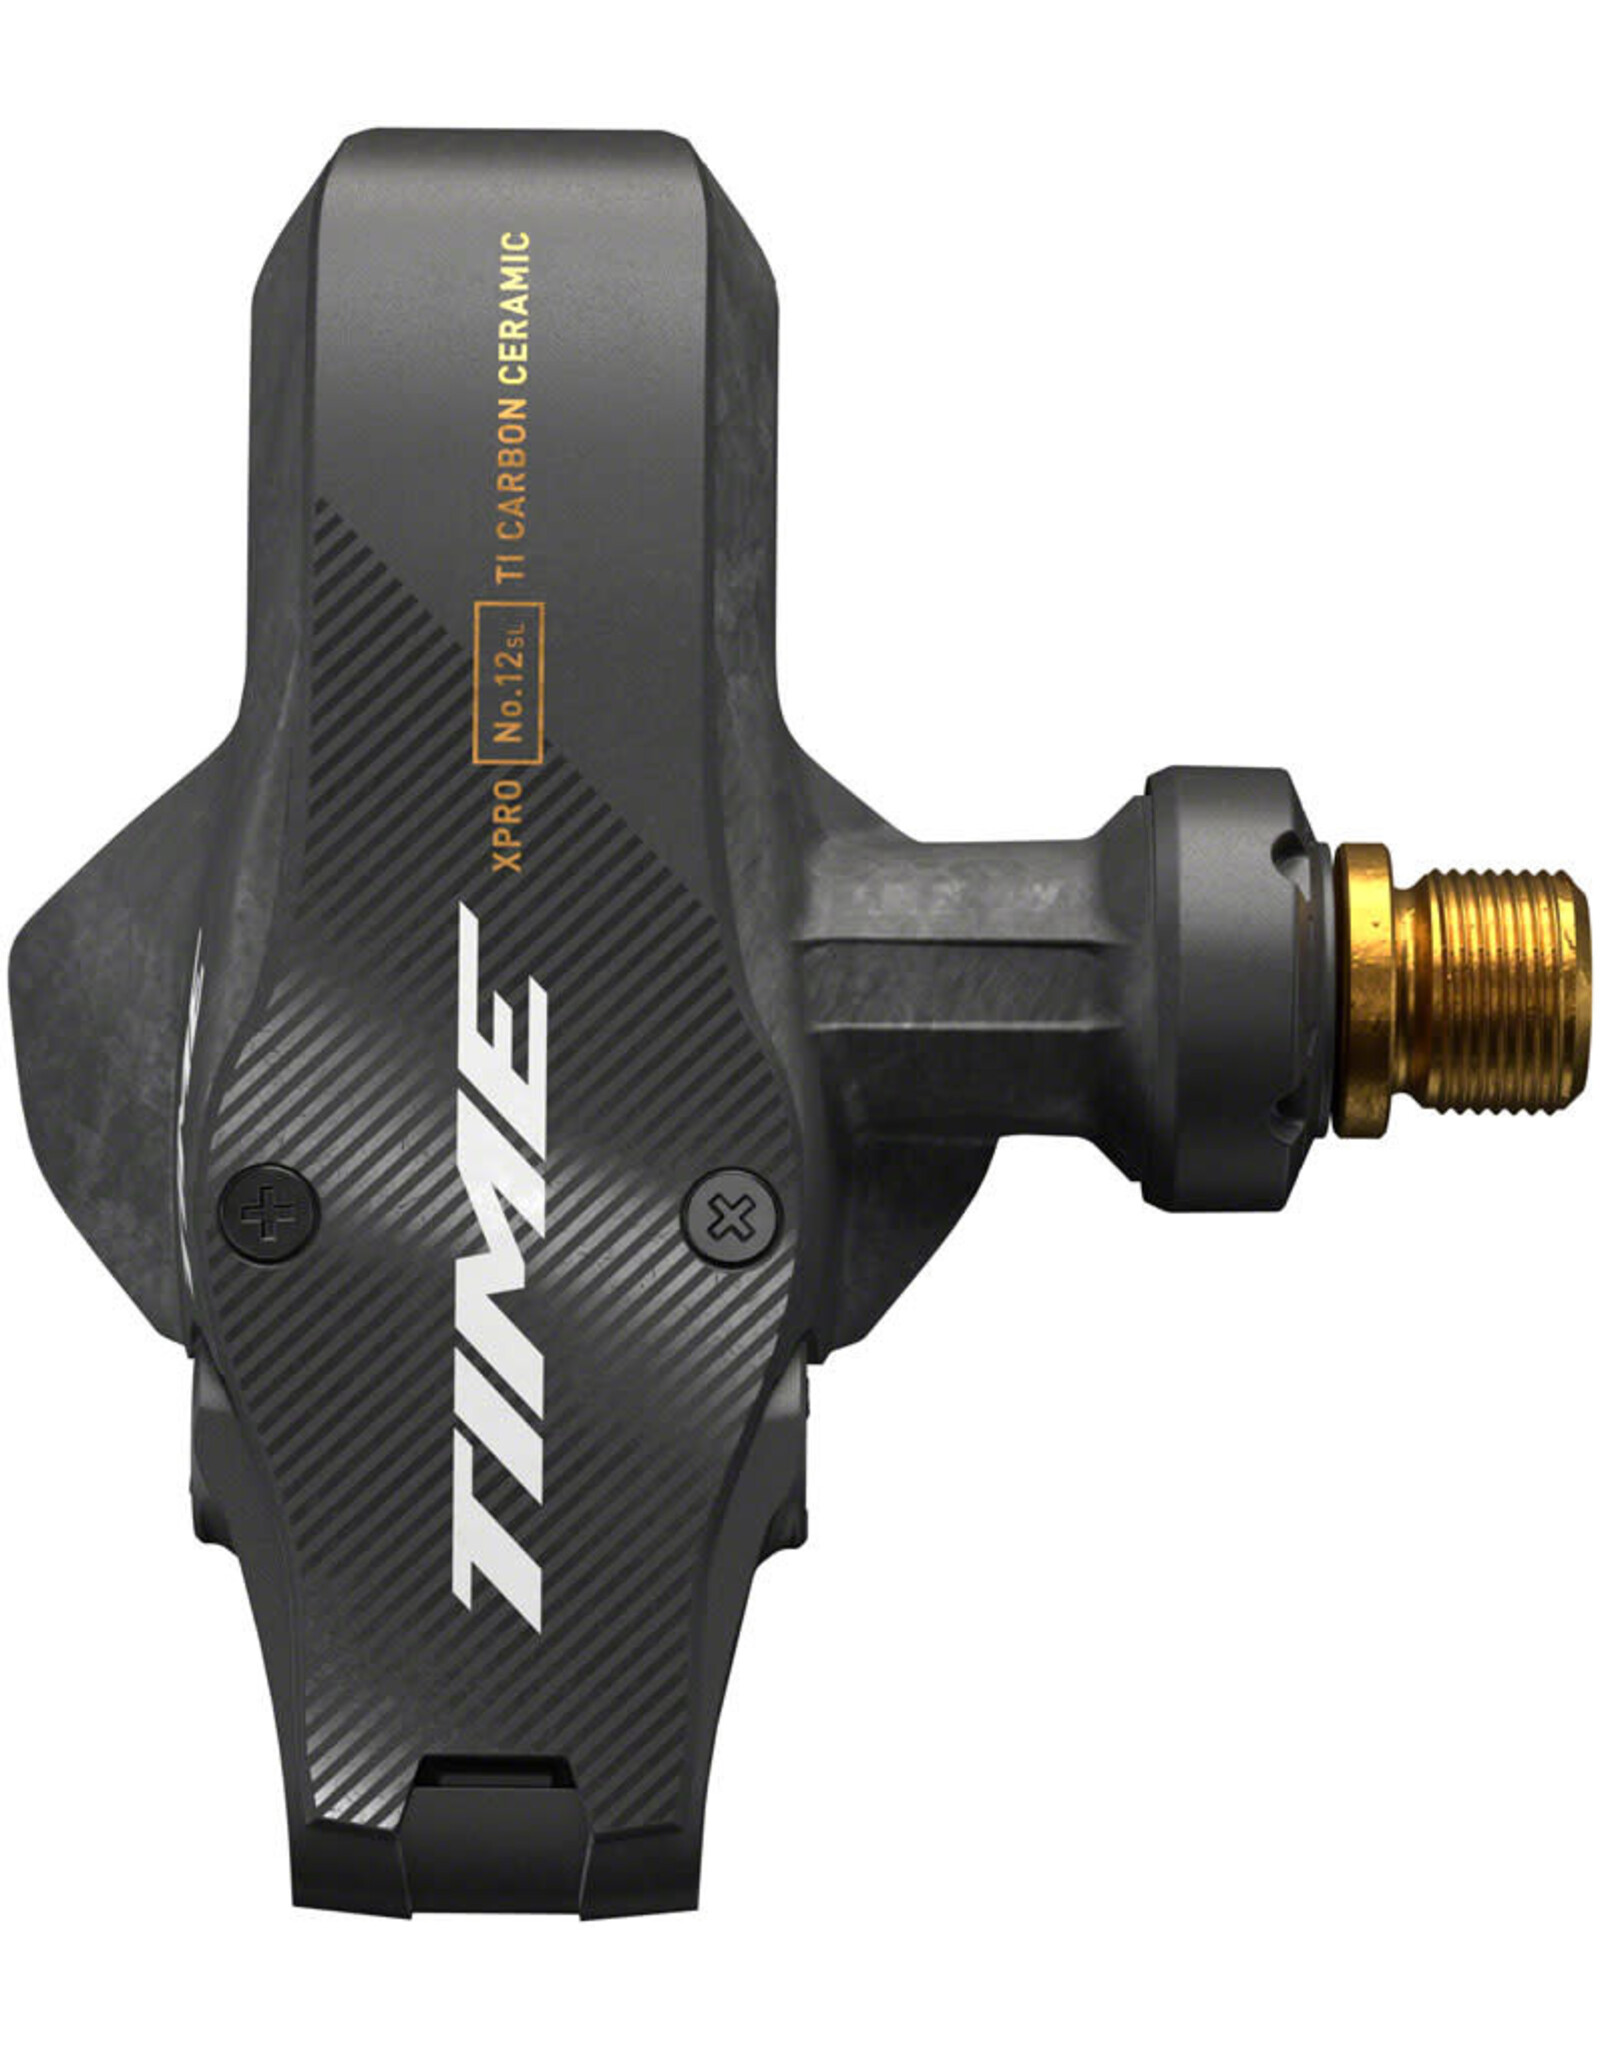 Time Time XPRO 12SL Pedals - Single Sided Clipless, Carbon, 9/16", Carbon/Gold, QF 53, B1